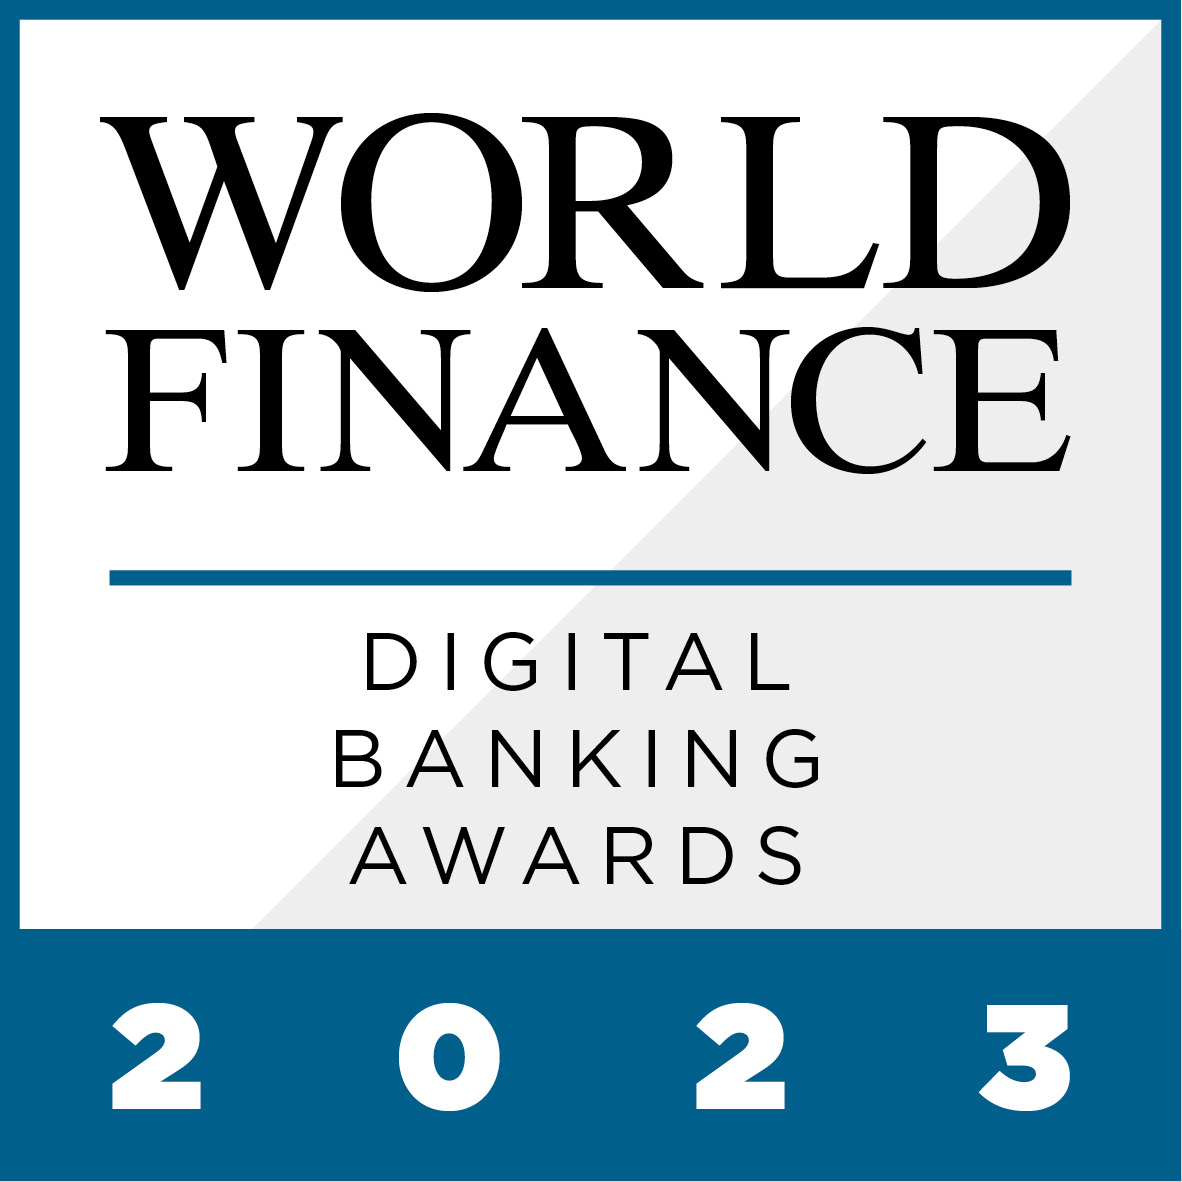 The winners of the World Finance Digital Banking Awards 2023